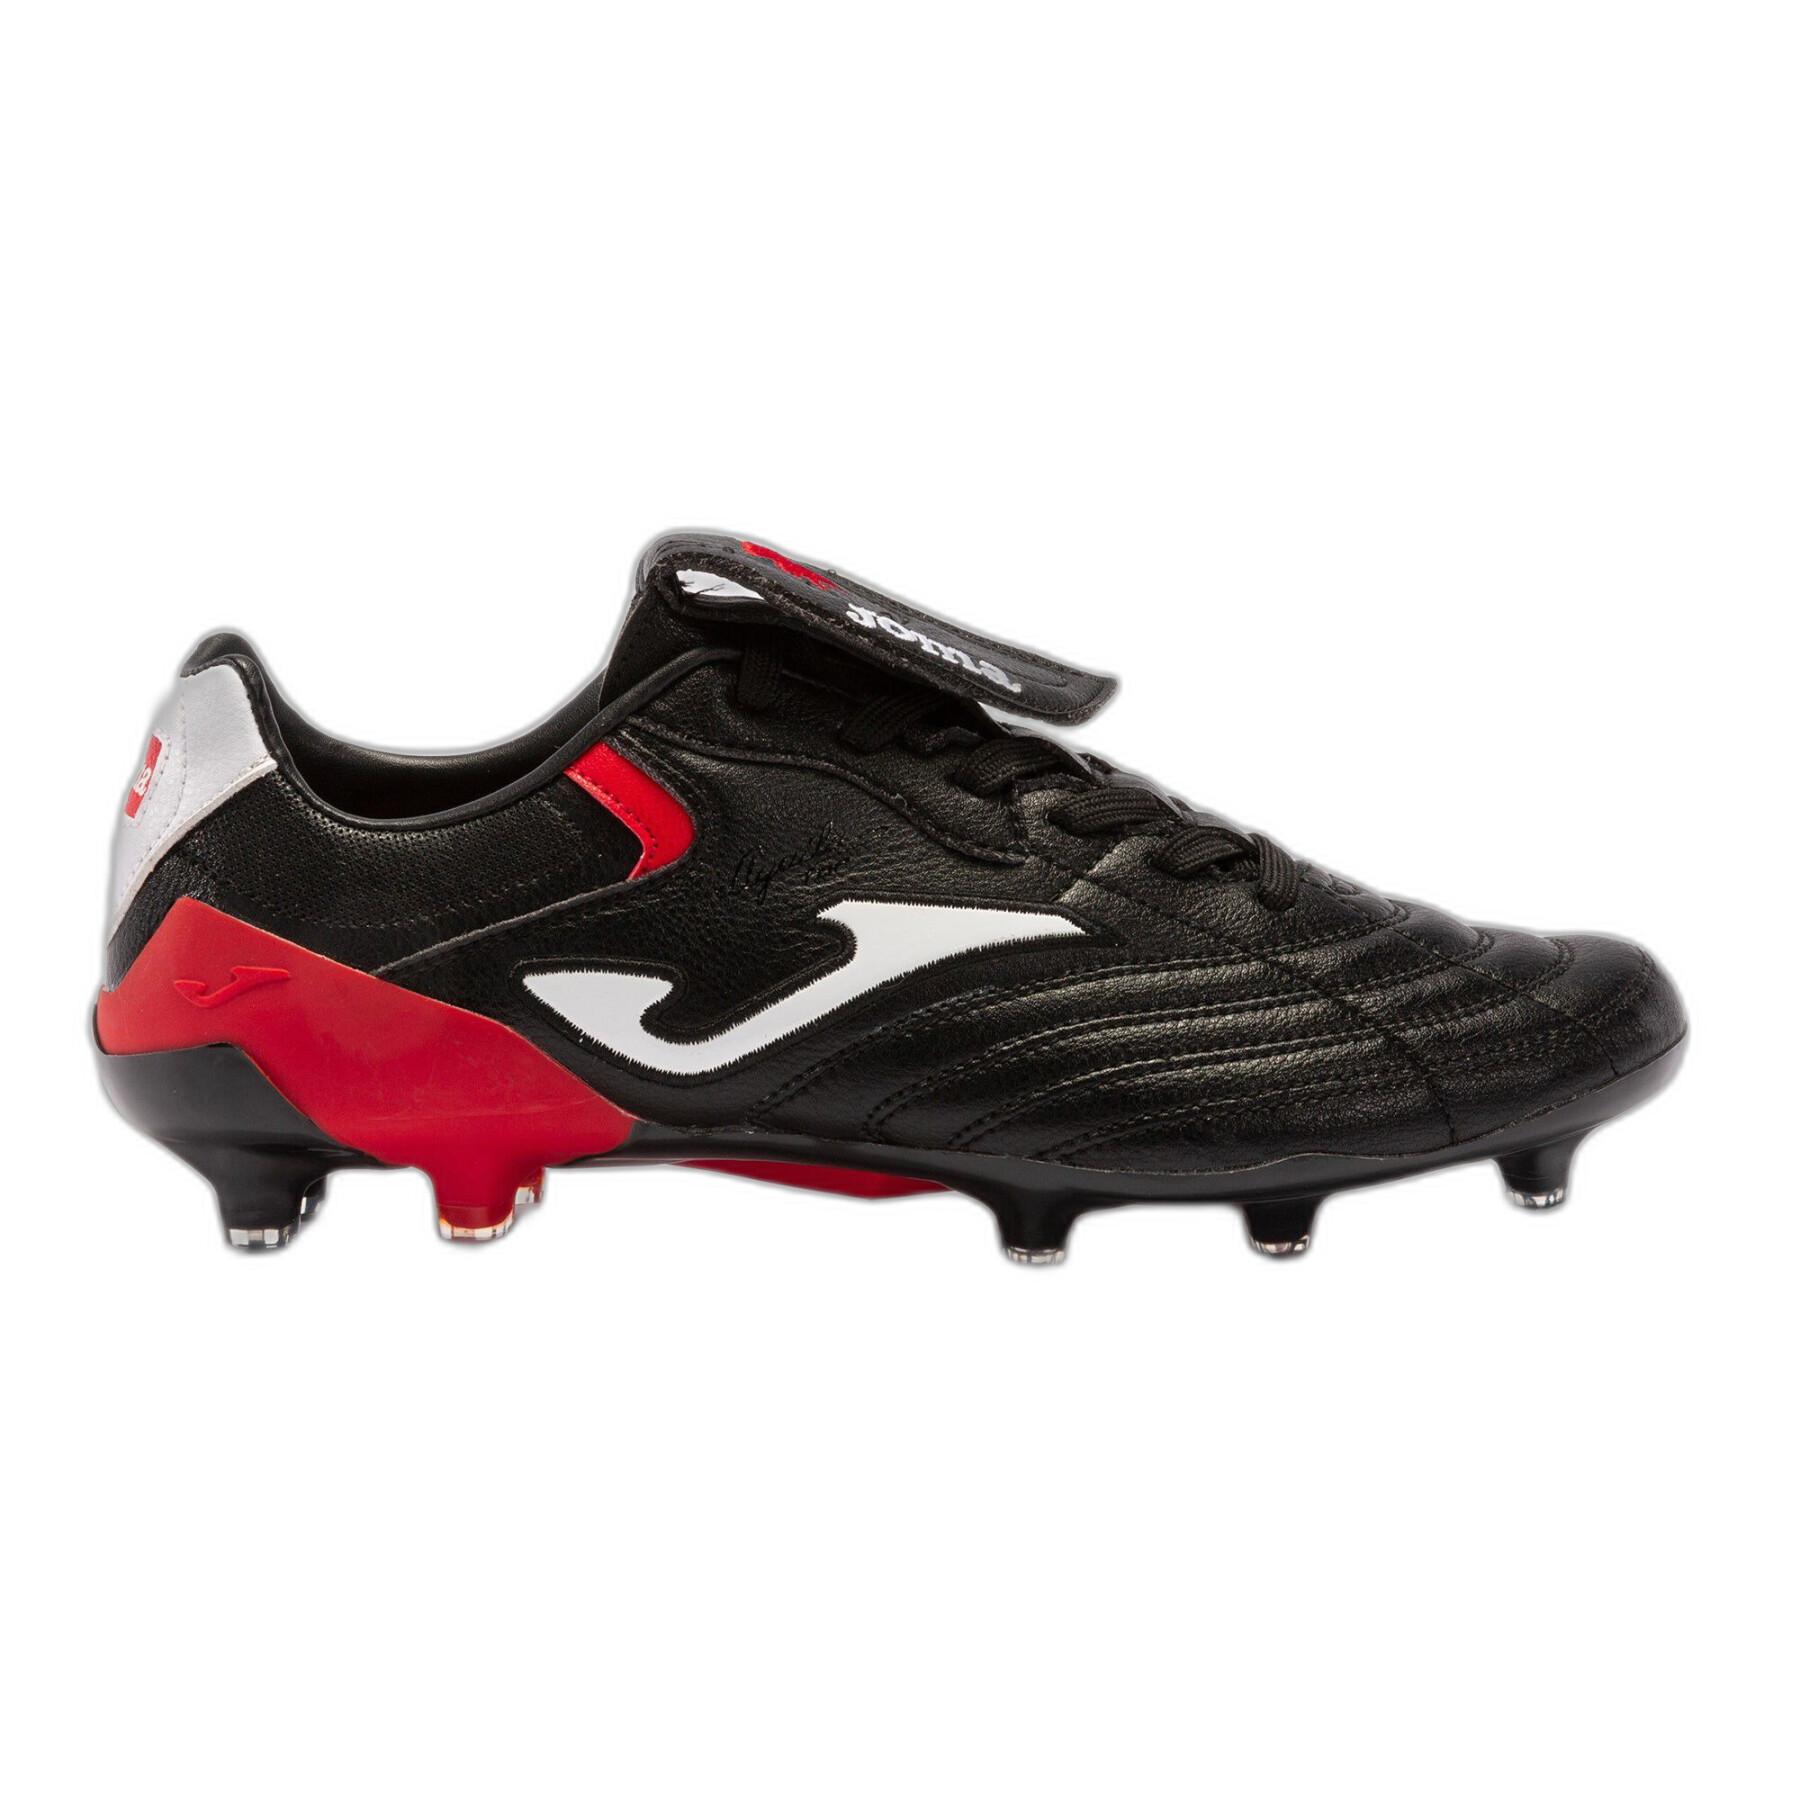 Chaussures de football Joma Aguila Cup 2301 FG